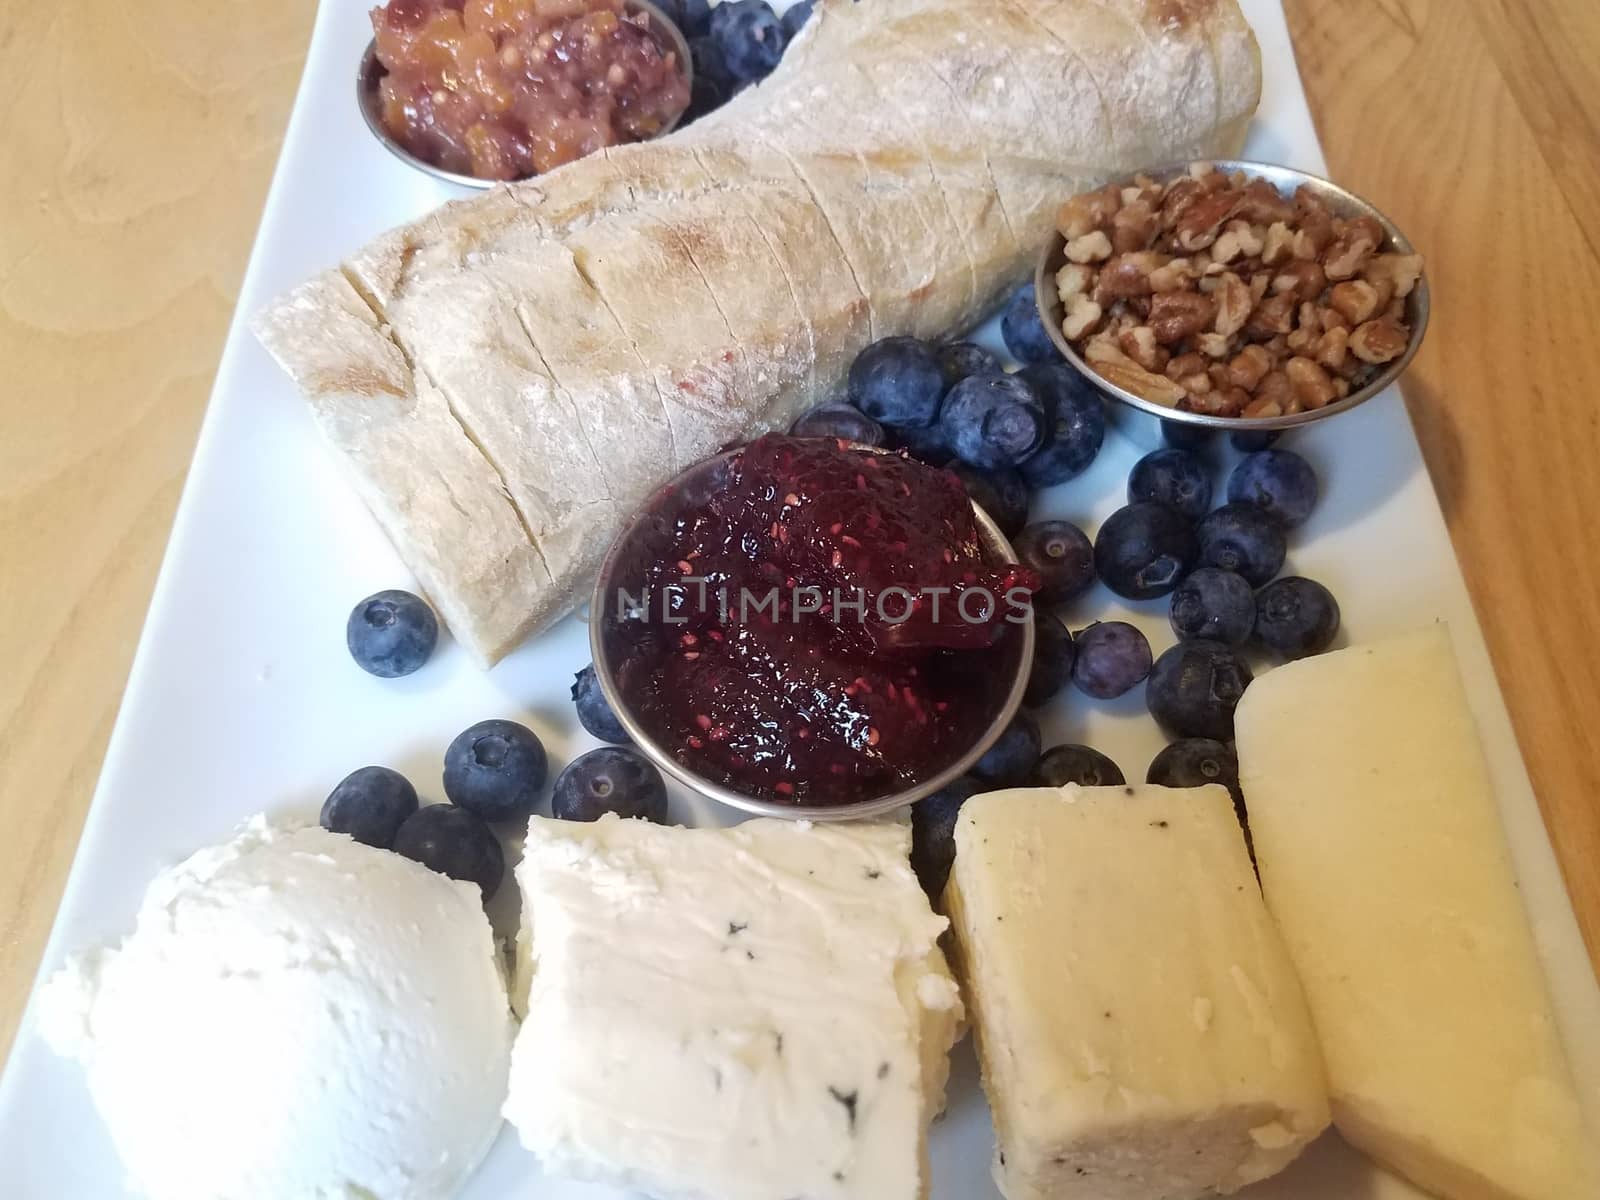 cheese pecans and bread and blueberries with jam on white plate